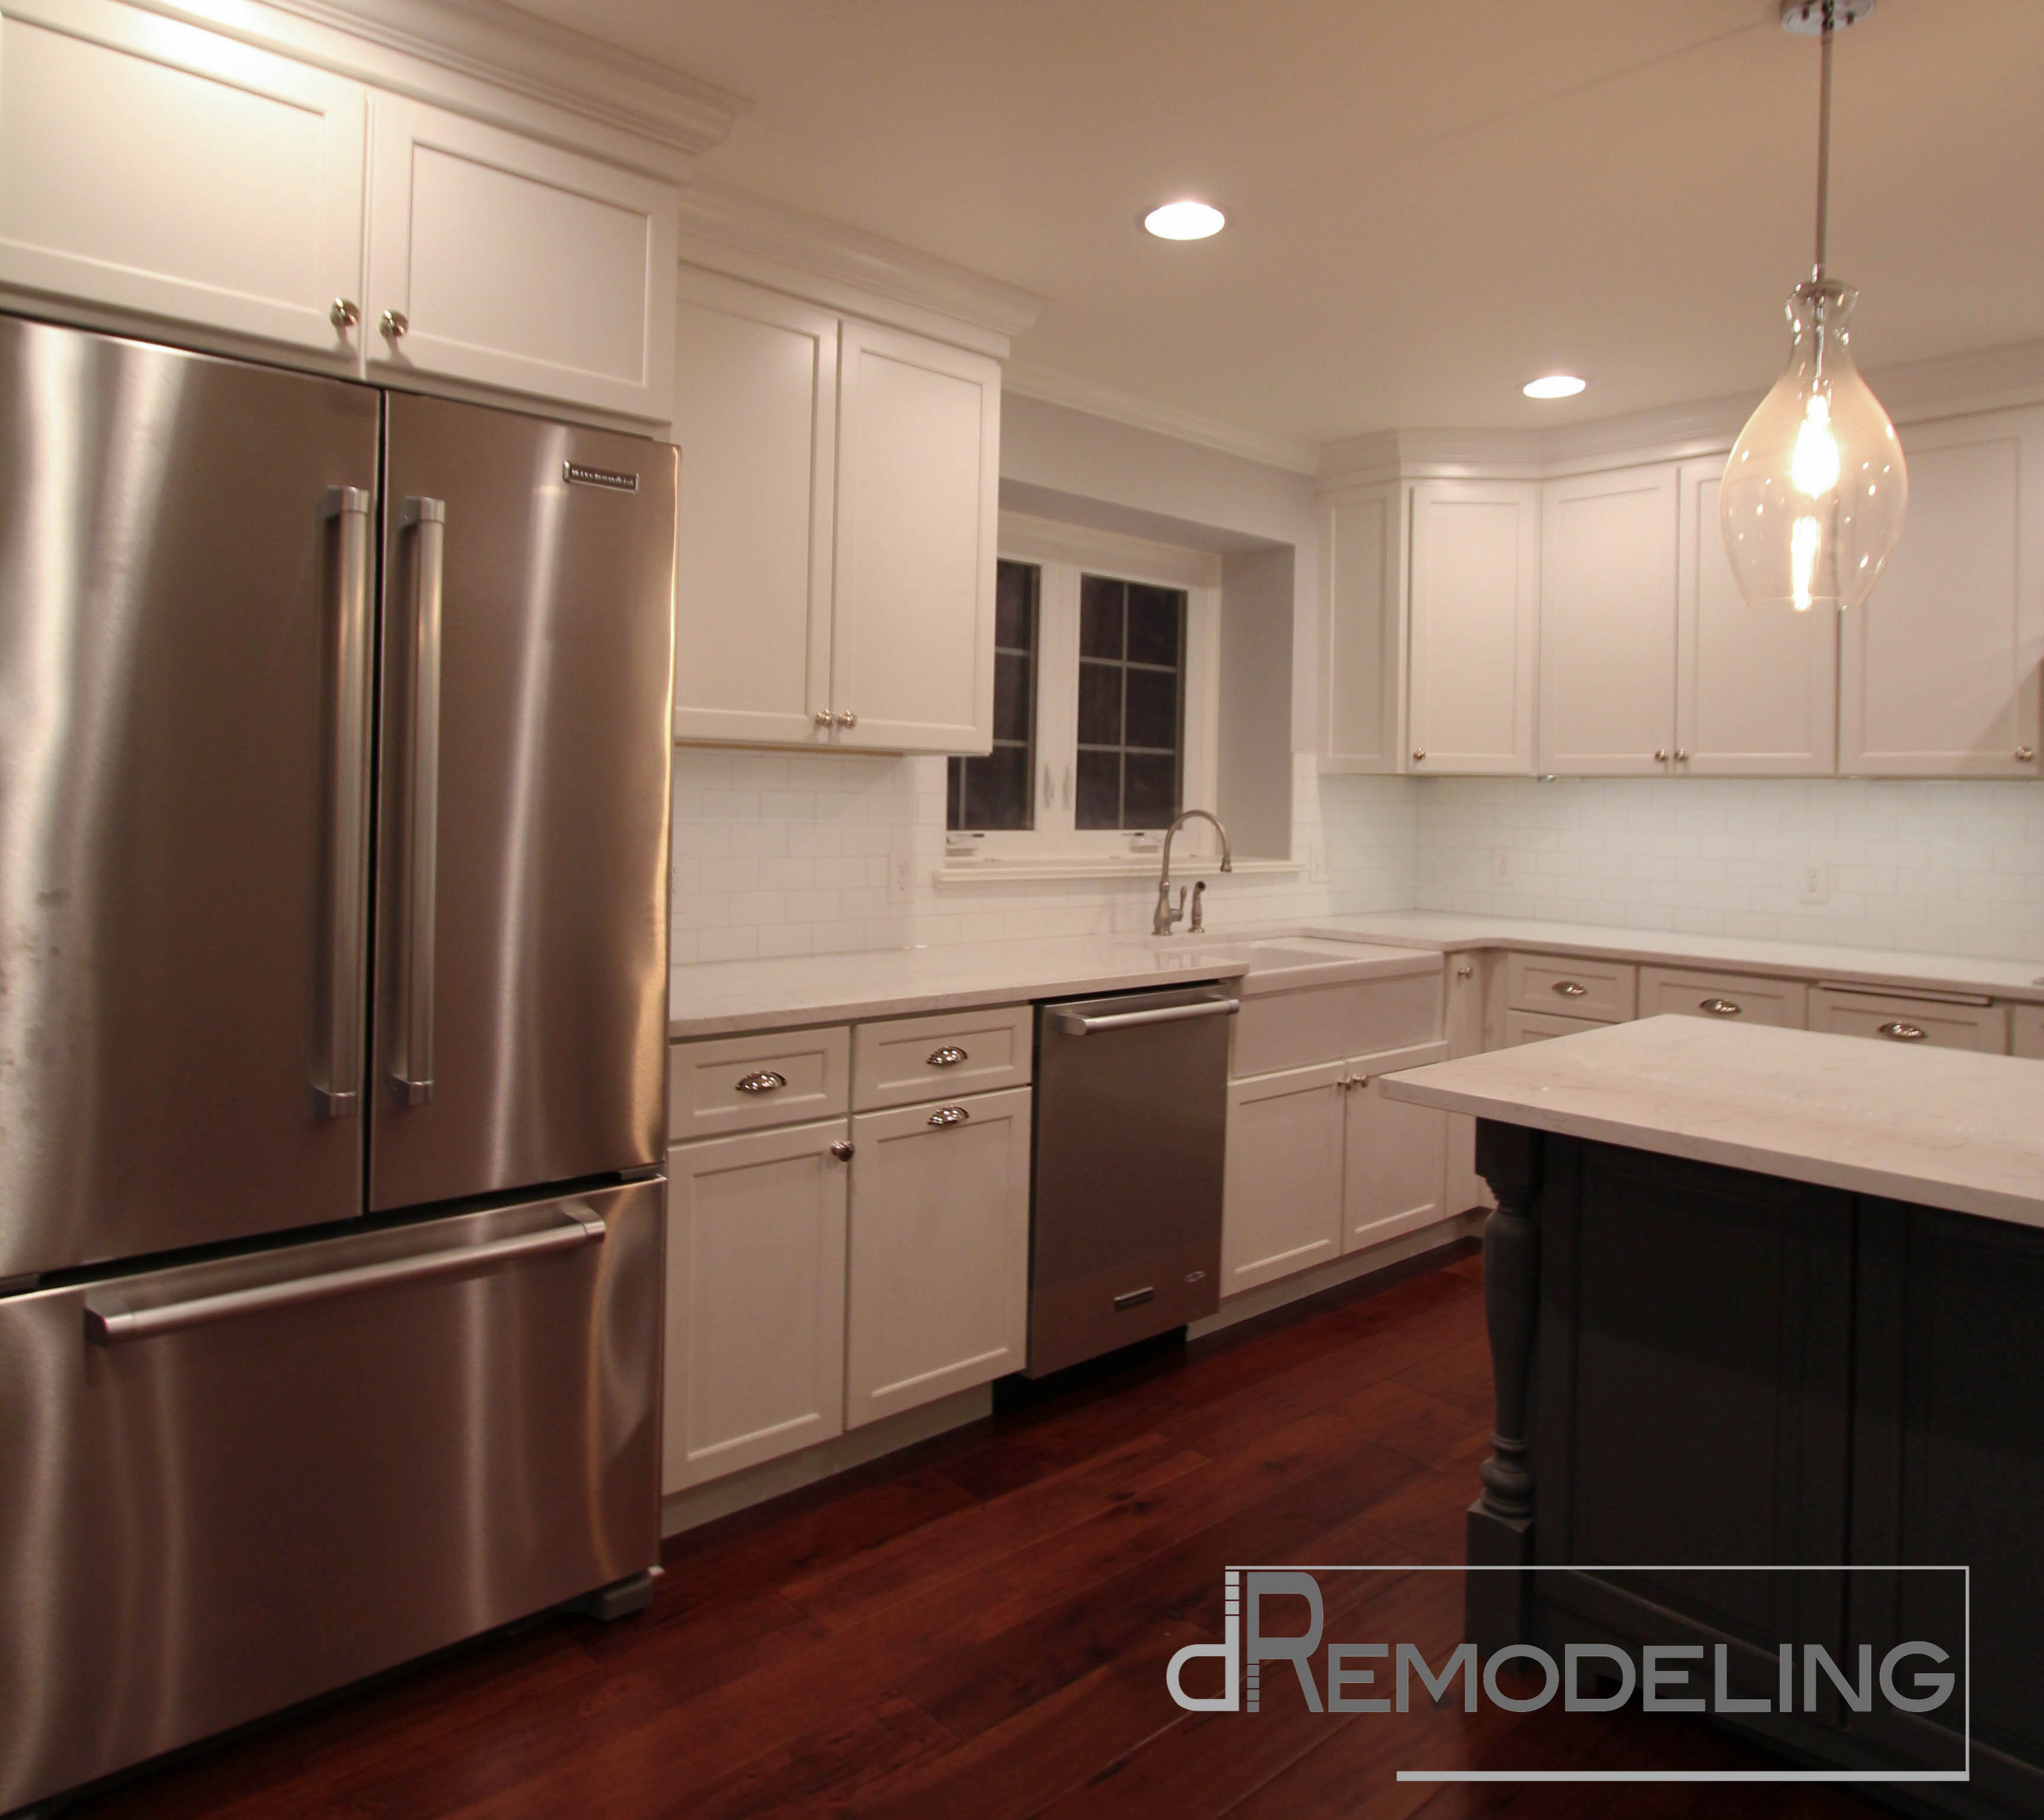 White shaker cabinets